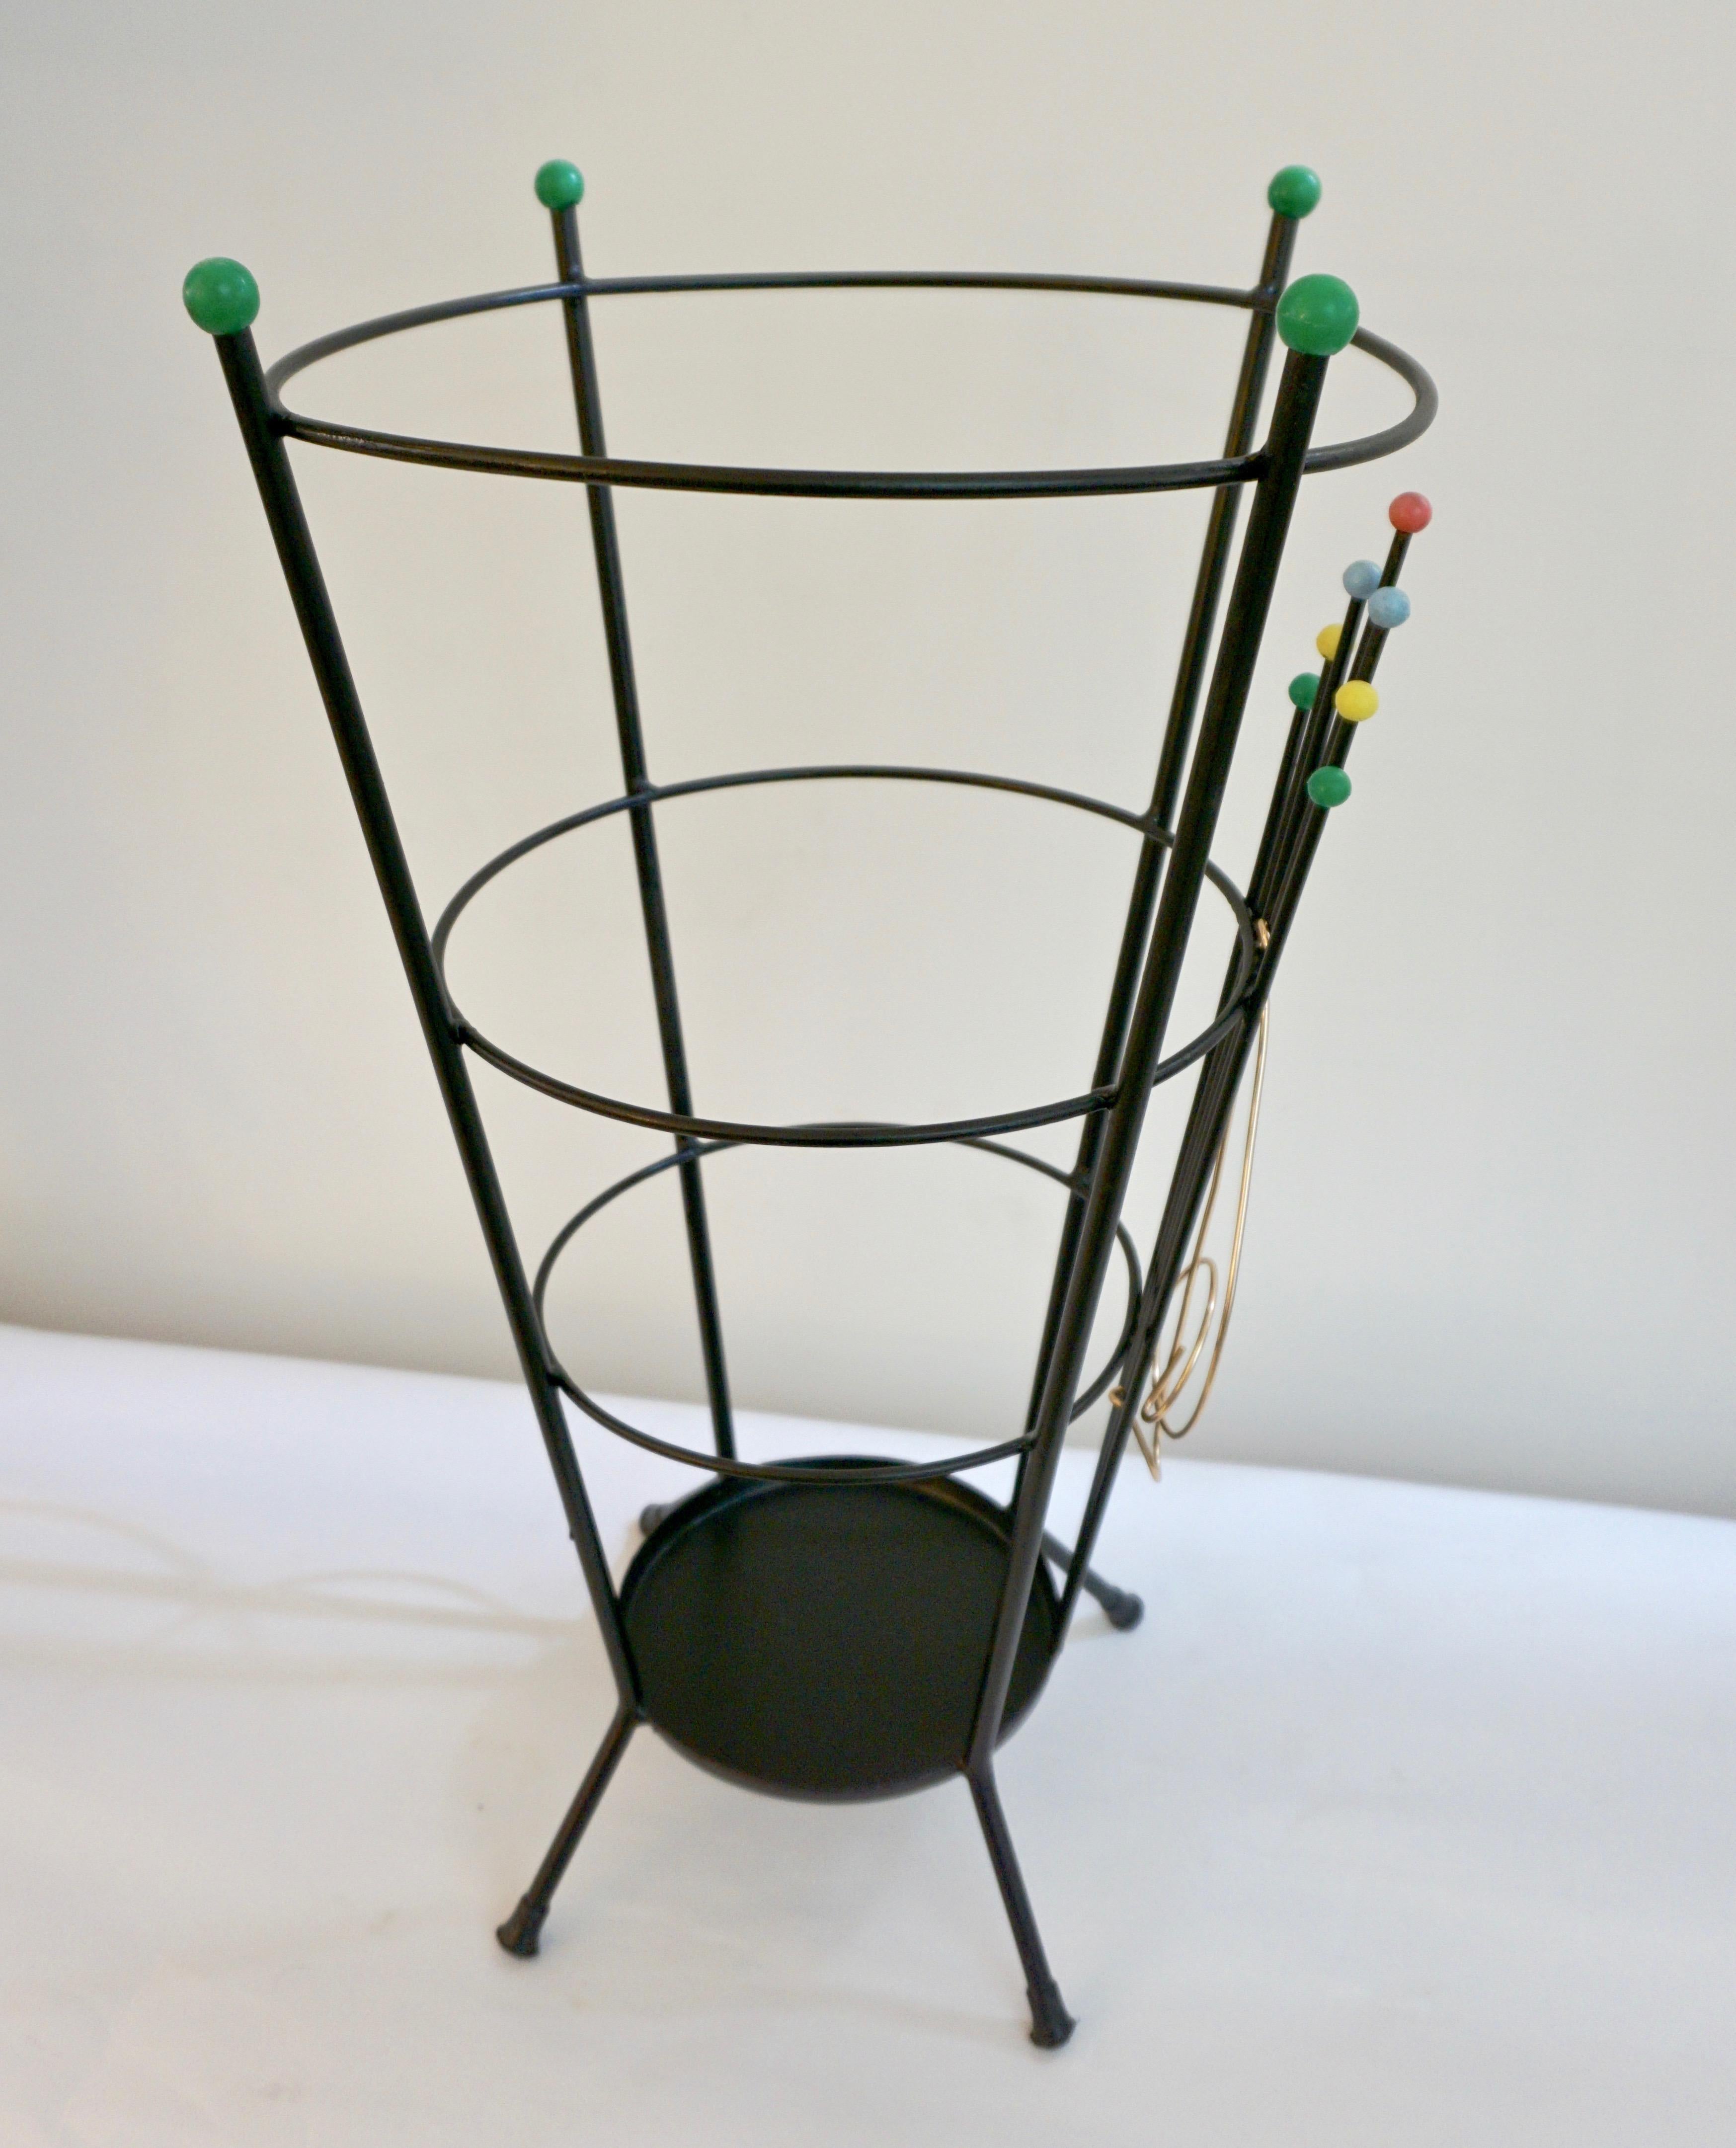 A delightful Italian umbrella stand by Stilnovo in black lacquered metal of conical flared shape, the minimalist modern design of the metal rods encircling the upright supports is gently highlighted on the front by a music clef in brass and